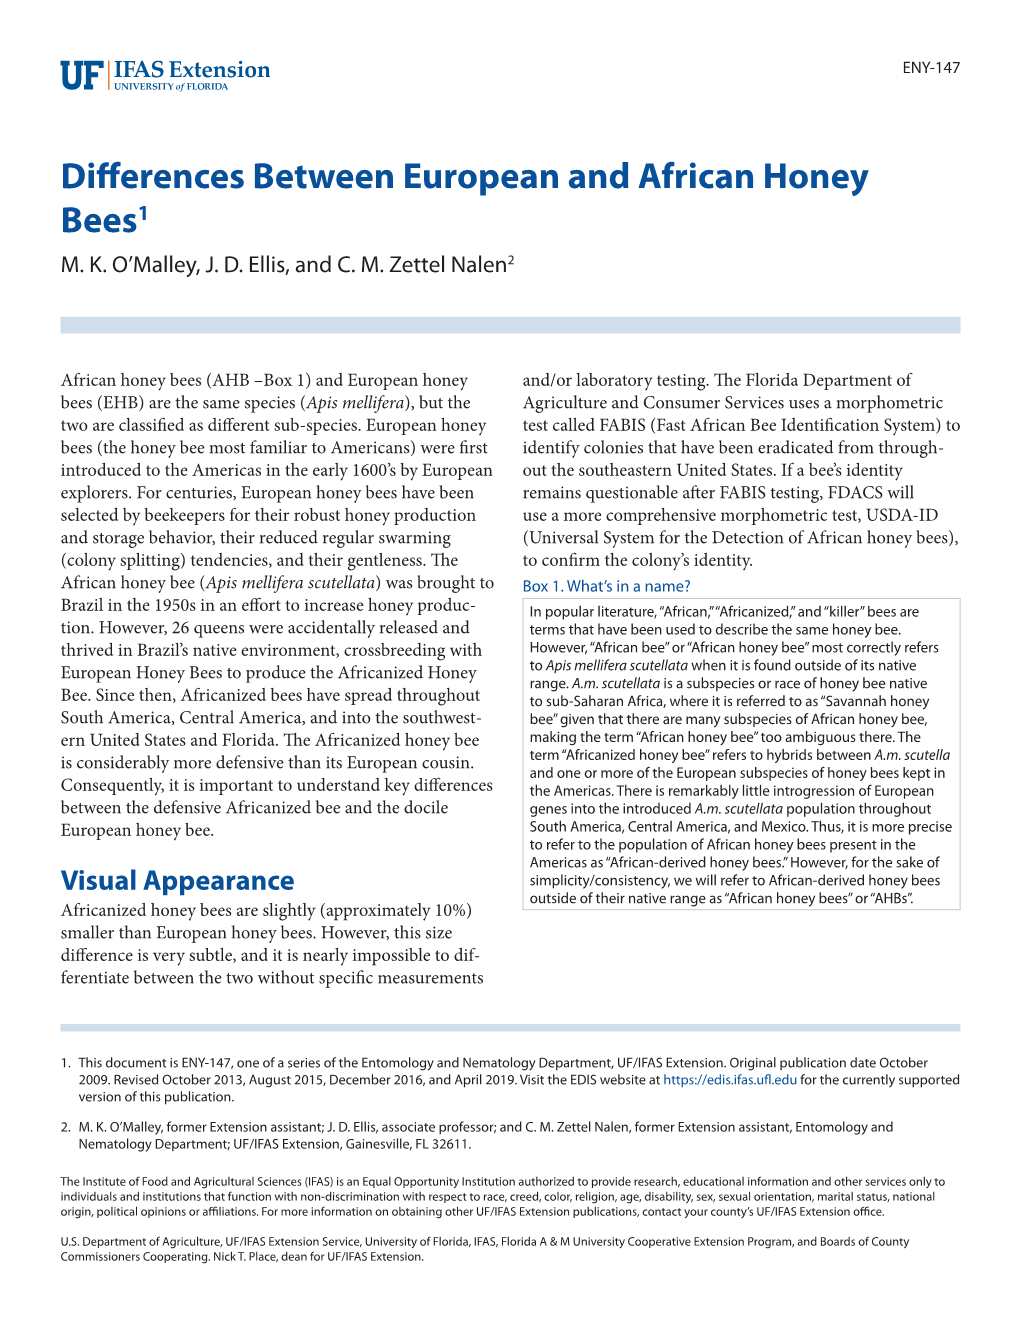 Differences Between European and African Honey Bees1 M